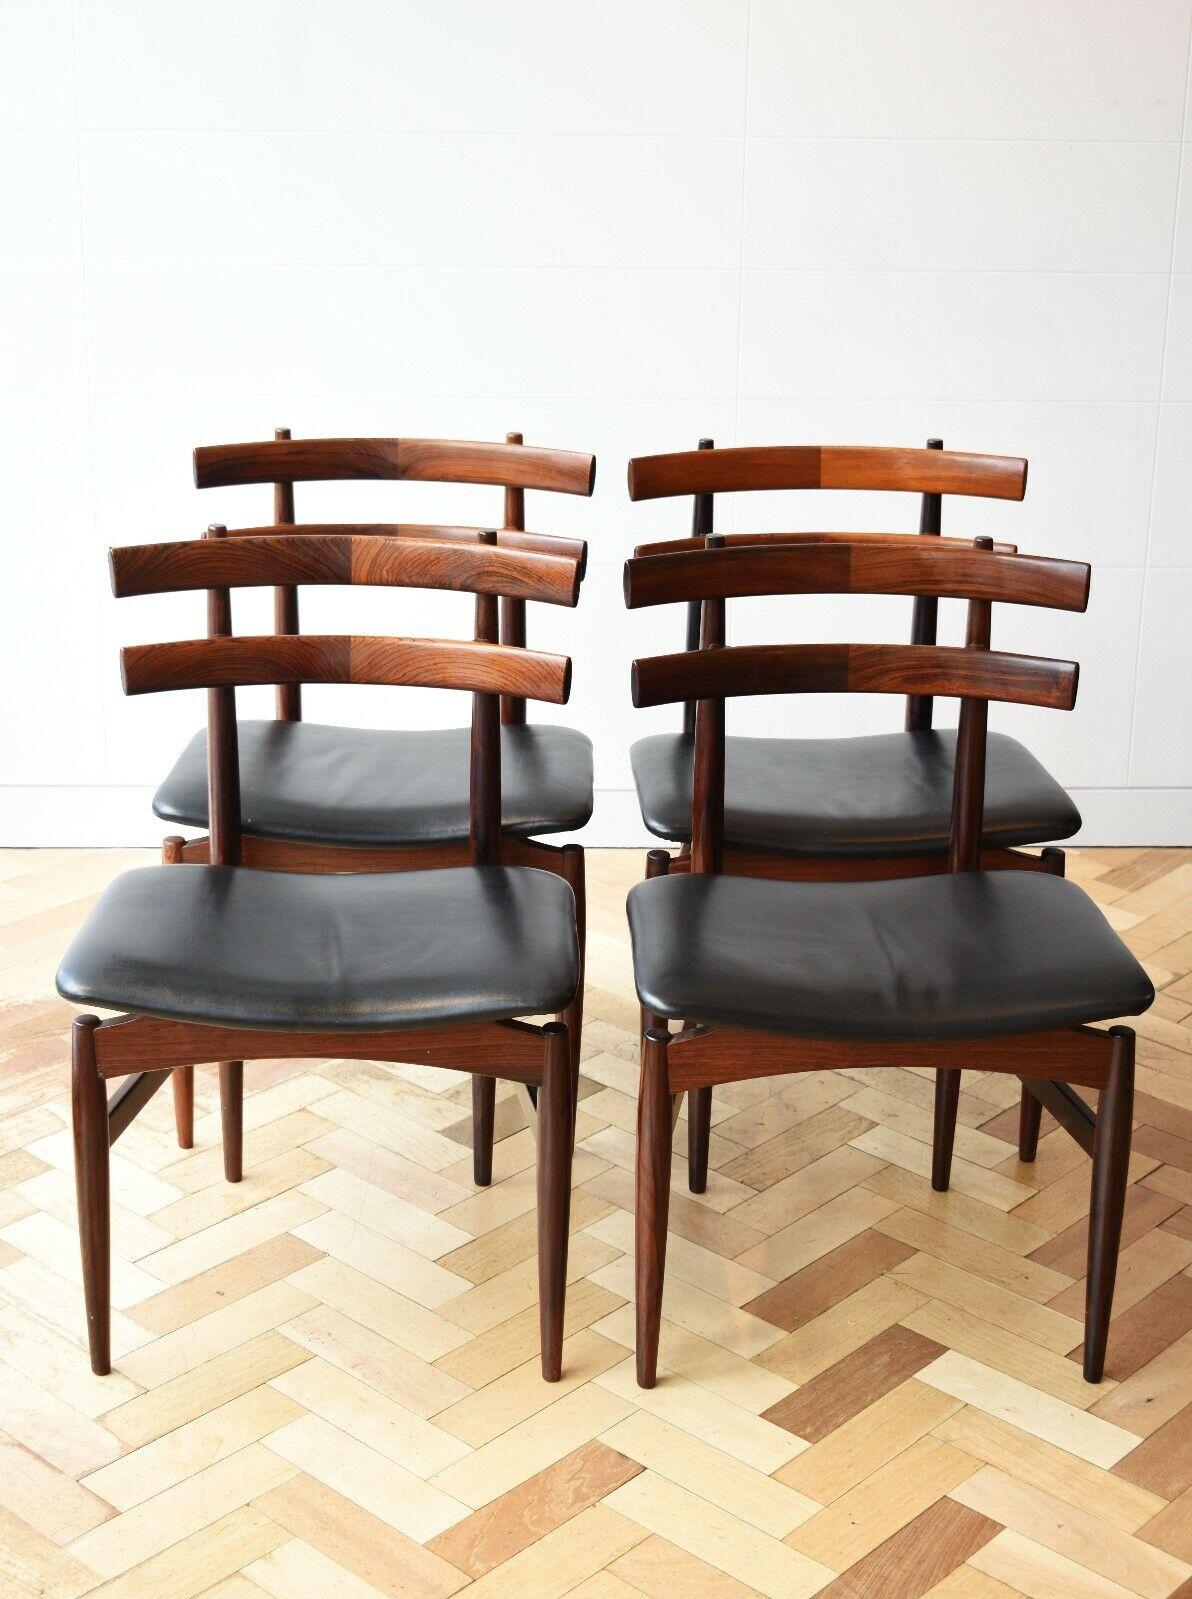 An immensely stylish and rare set of 4 Danish rosewood dining chairs designed by Poul Hundevad, circa 1950's. 

These model number 30 chairs feature a curved two - rung ladder backrests with tapered legs in a beautiful deep Rosewood with black